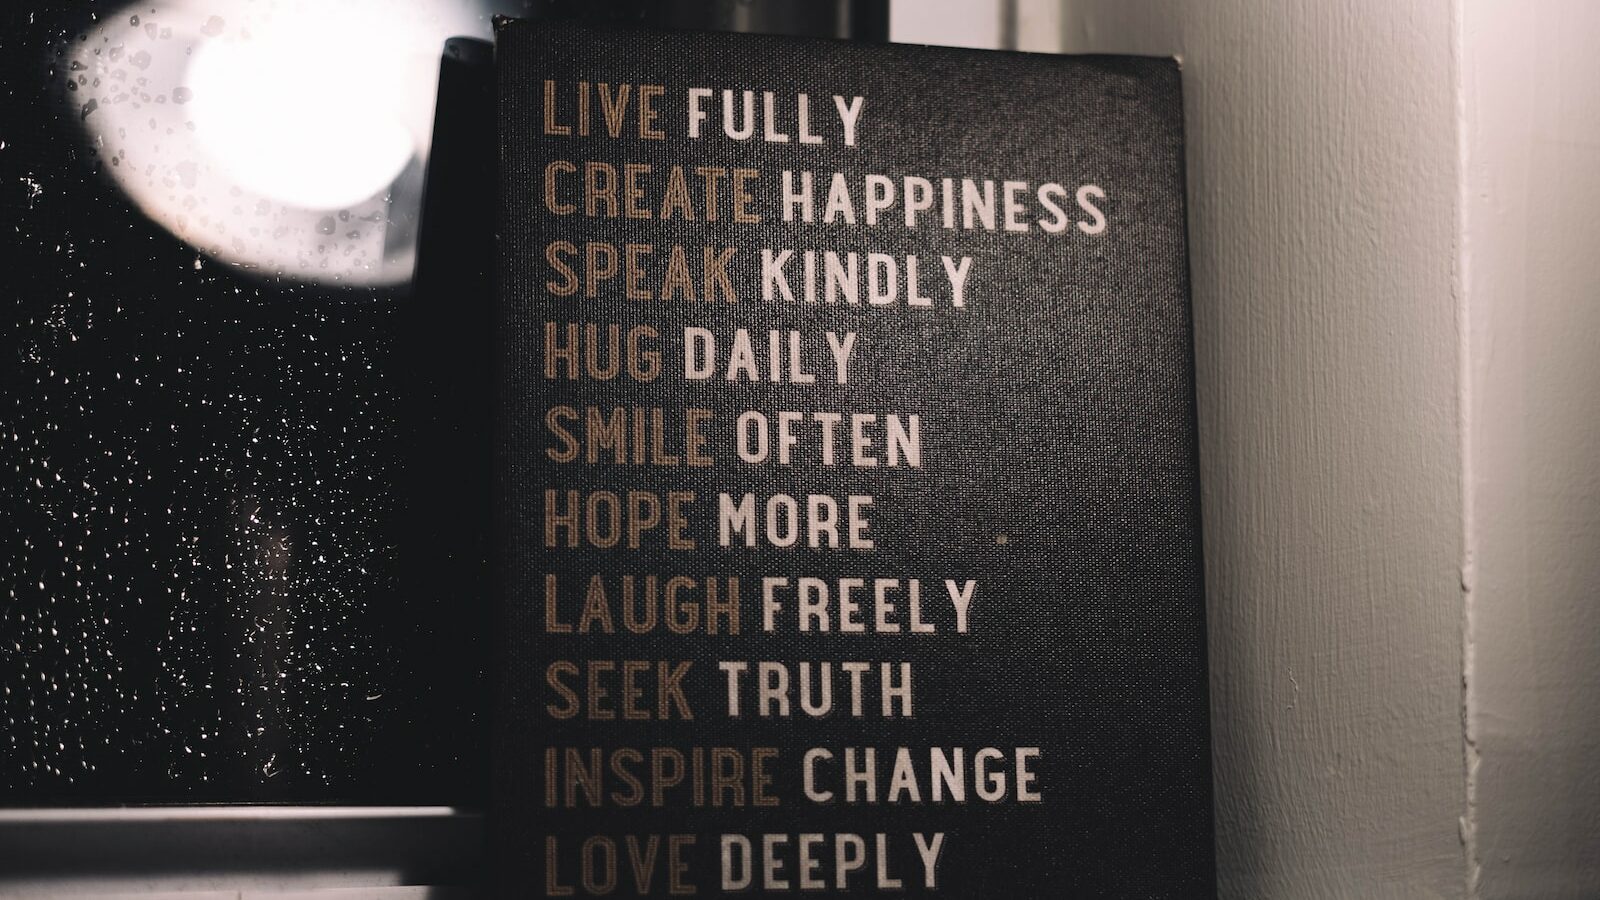 live fully create happiness speak kindly decor